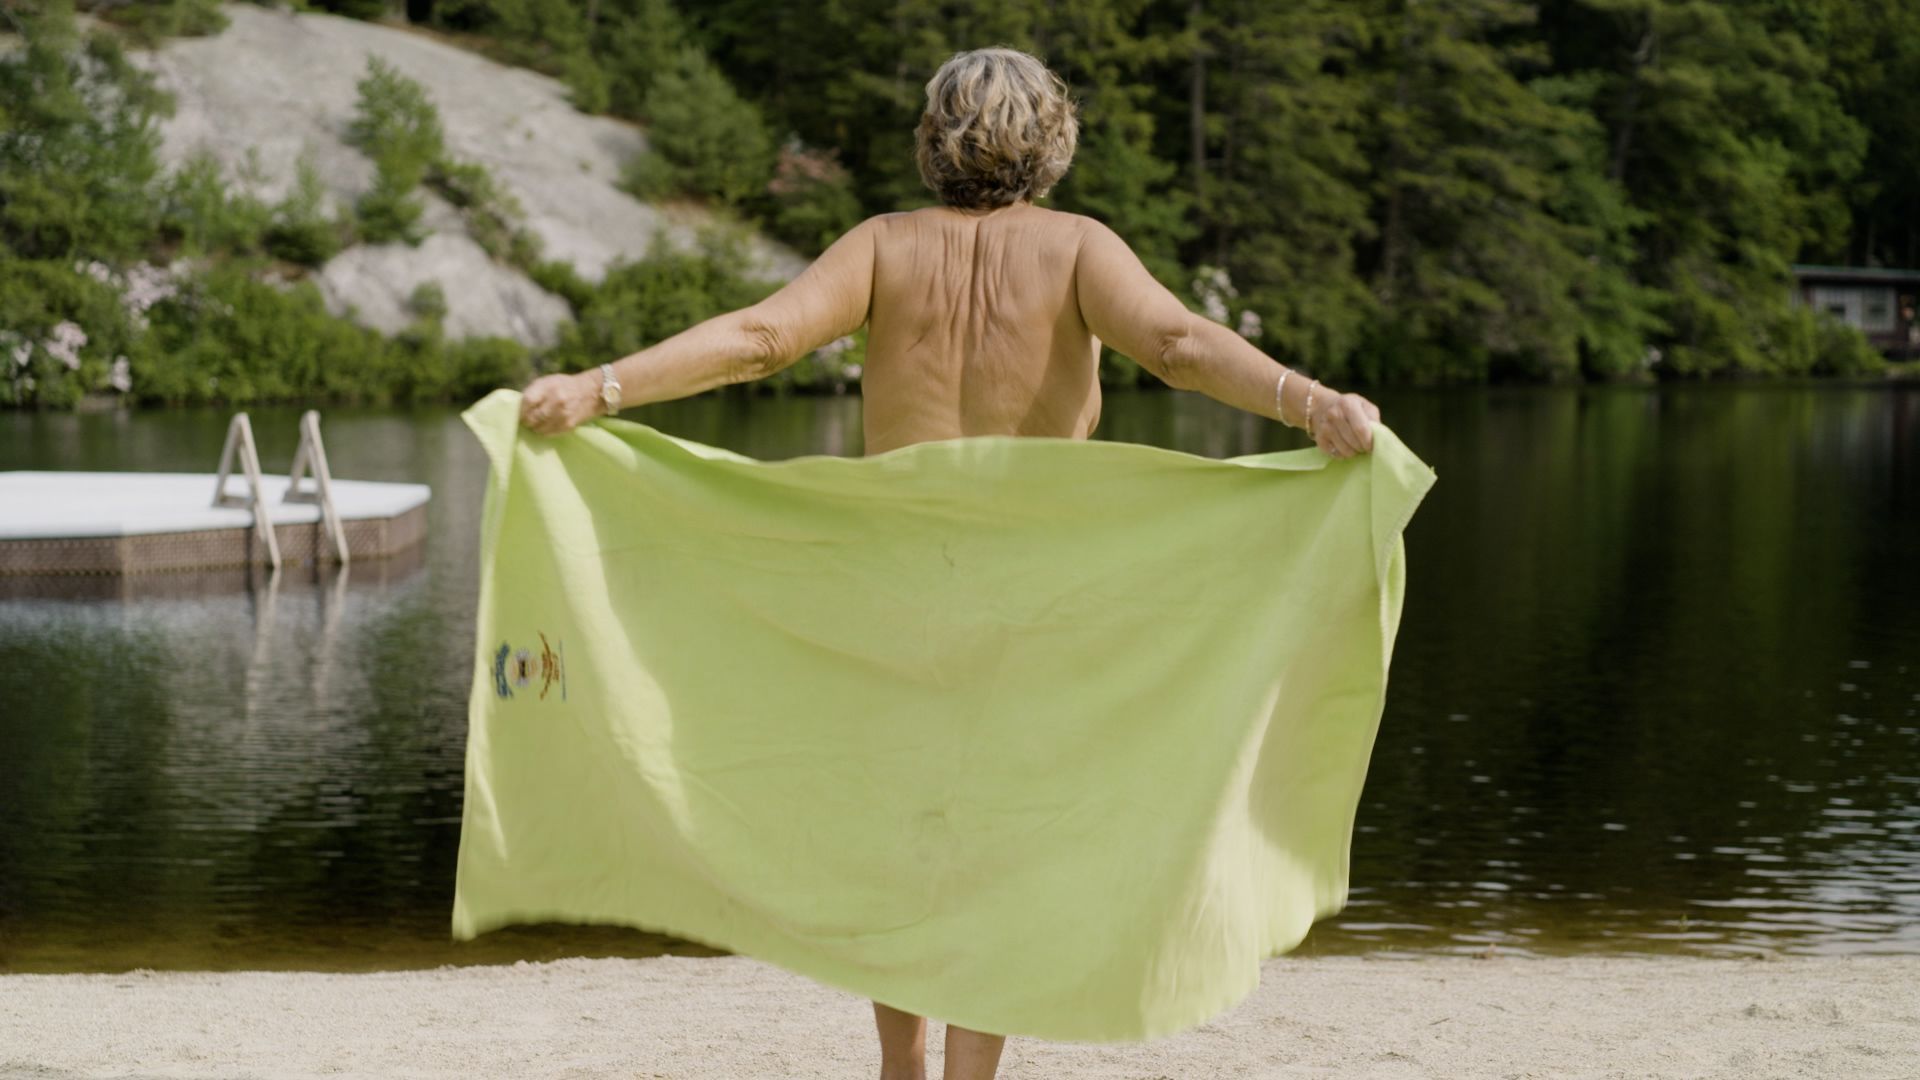 Adult Nudist Camp Videos - Nudist explains what you should definitely not do at a nude beach | CNN